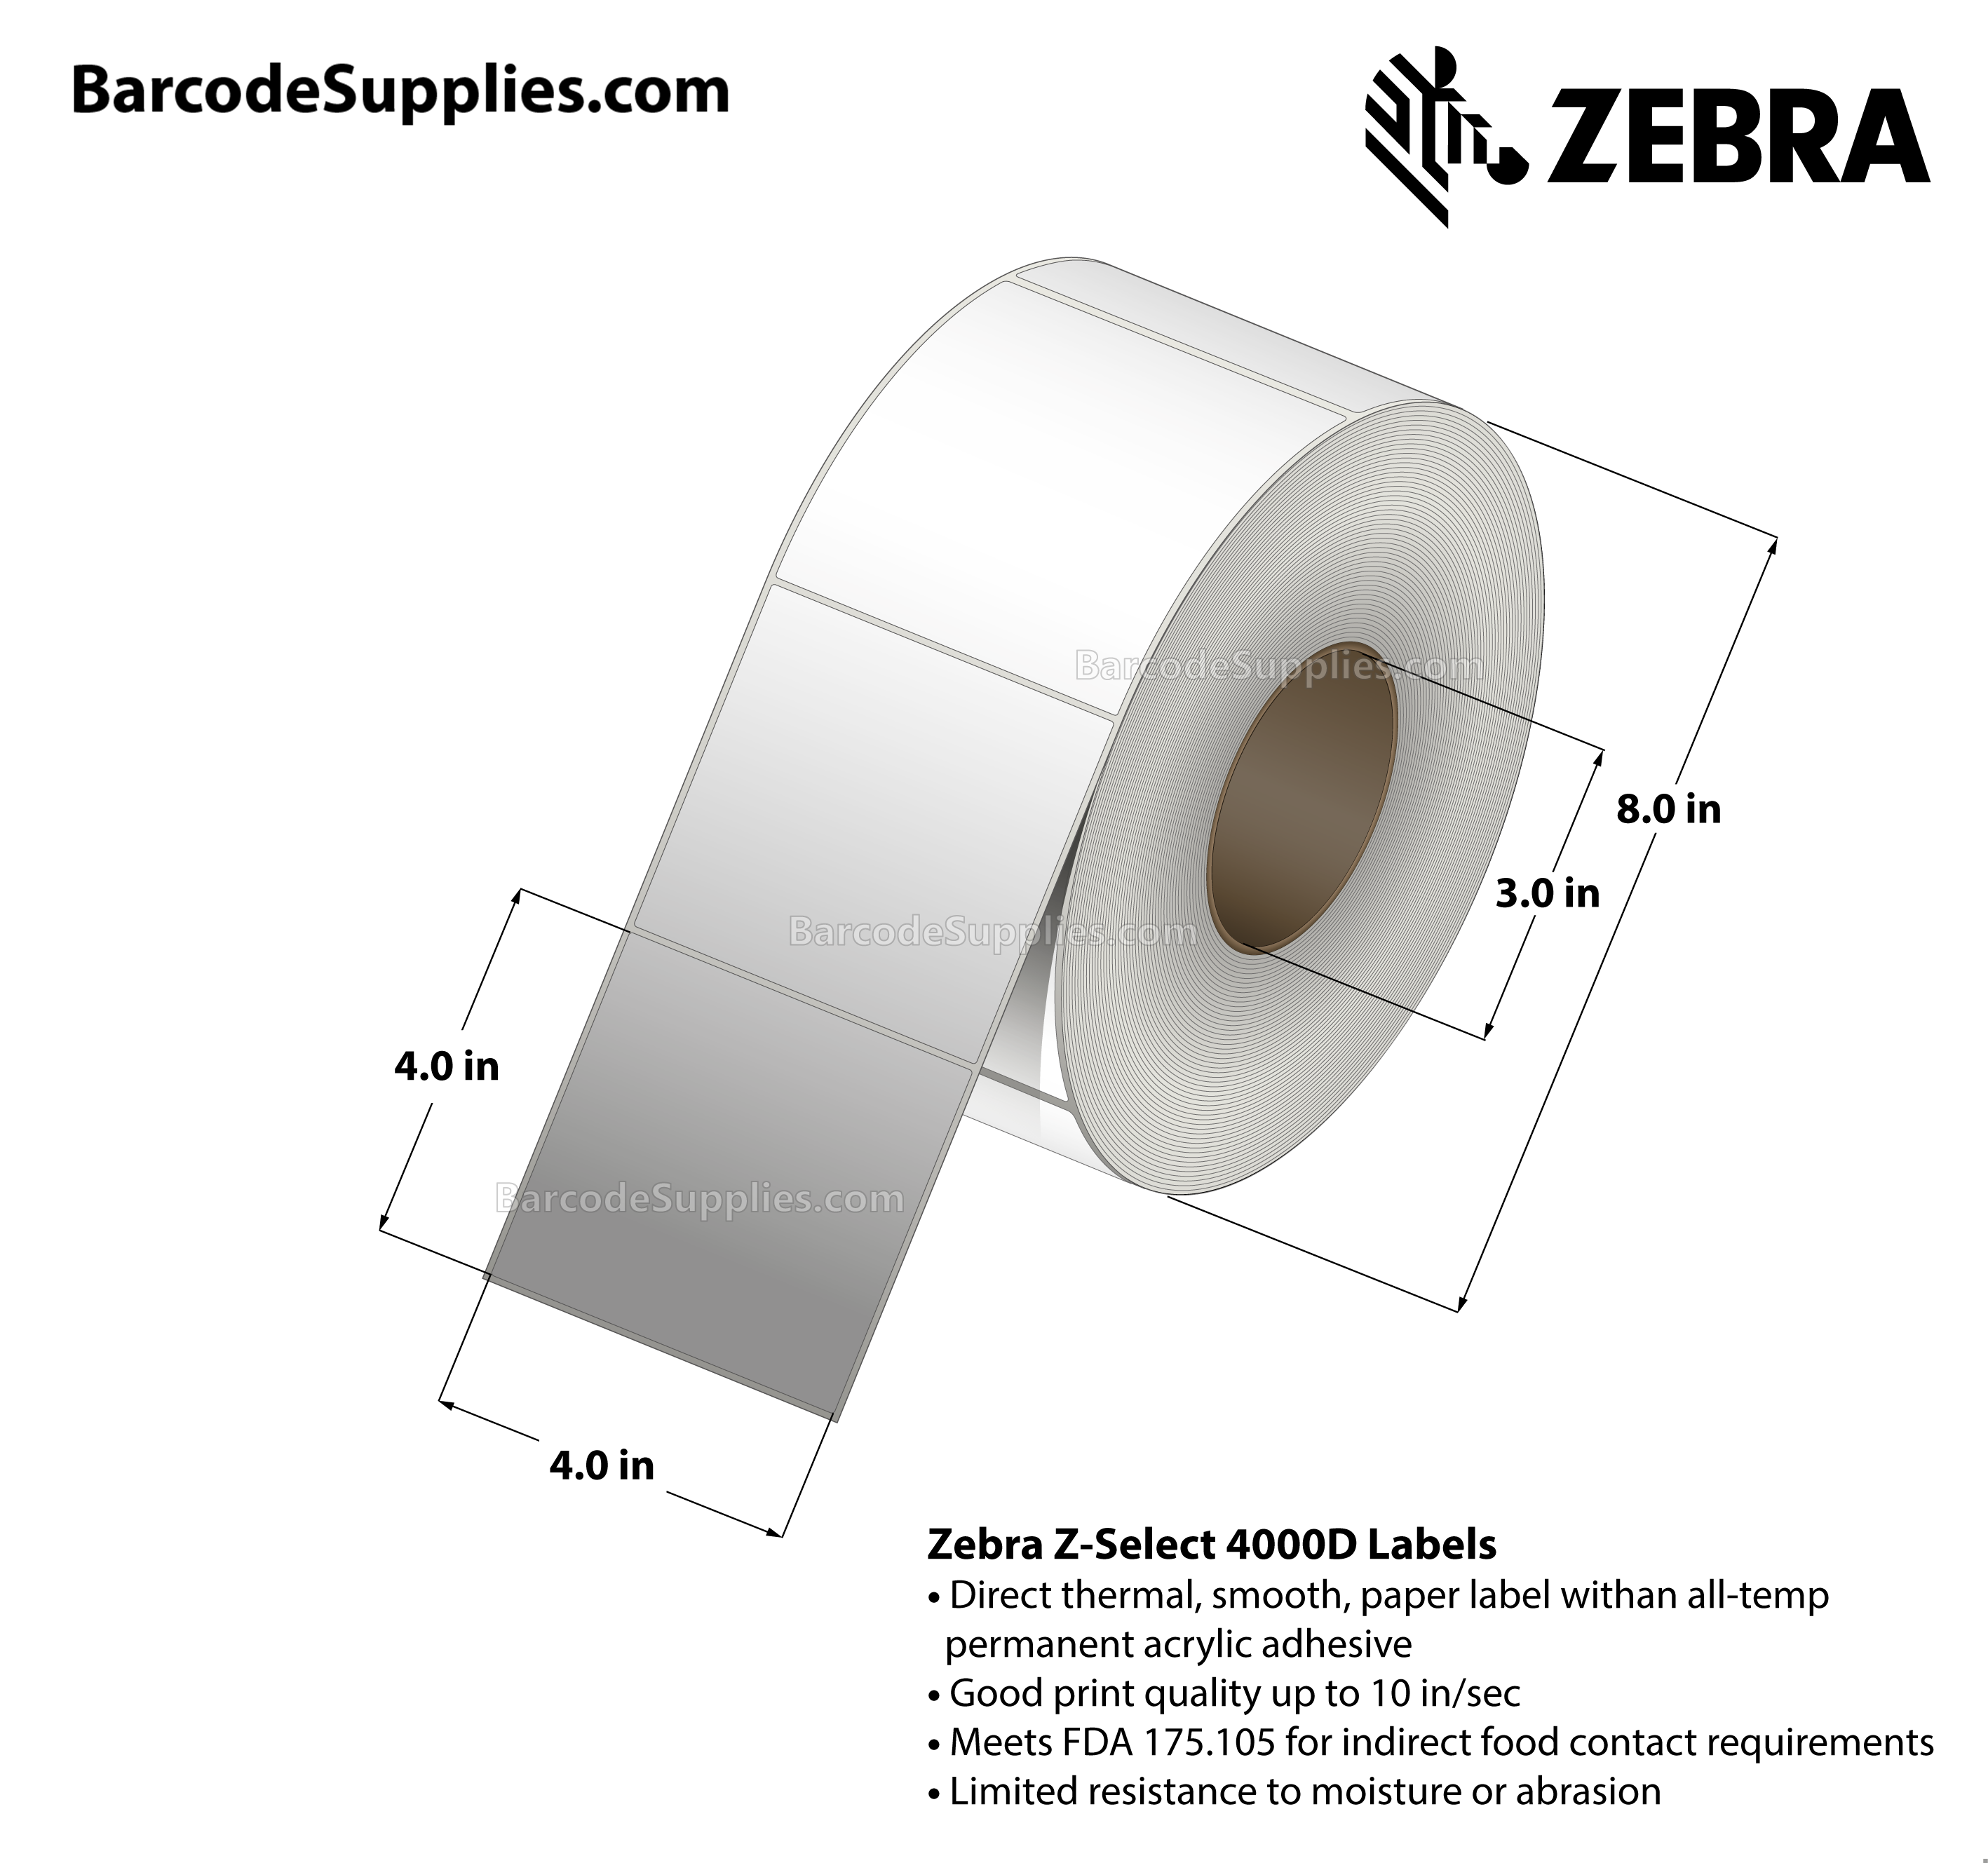 4 x 4 Direct Thermal White Z-Select 4000D Labels With All-Temp Adhesive - Not Perforated - 1400 Labels Per Roll - Carton Of 4 Rolls - 5600 Labels Total - MPN: 82801